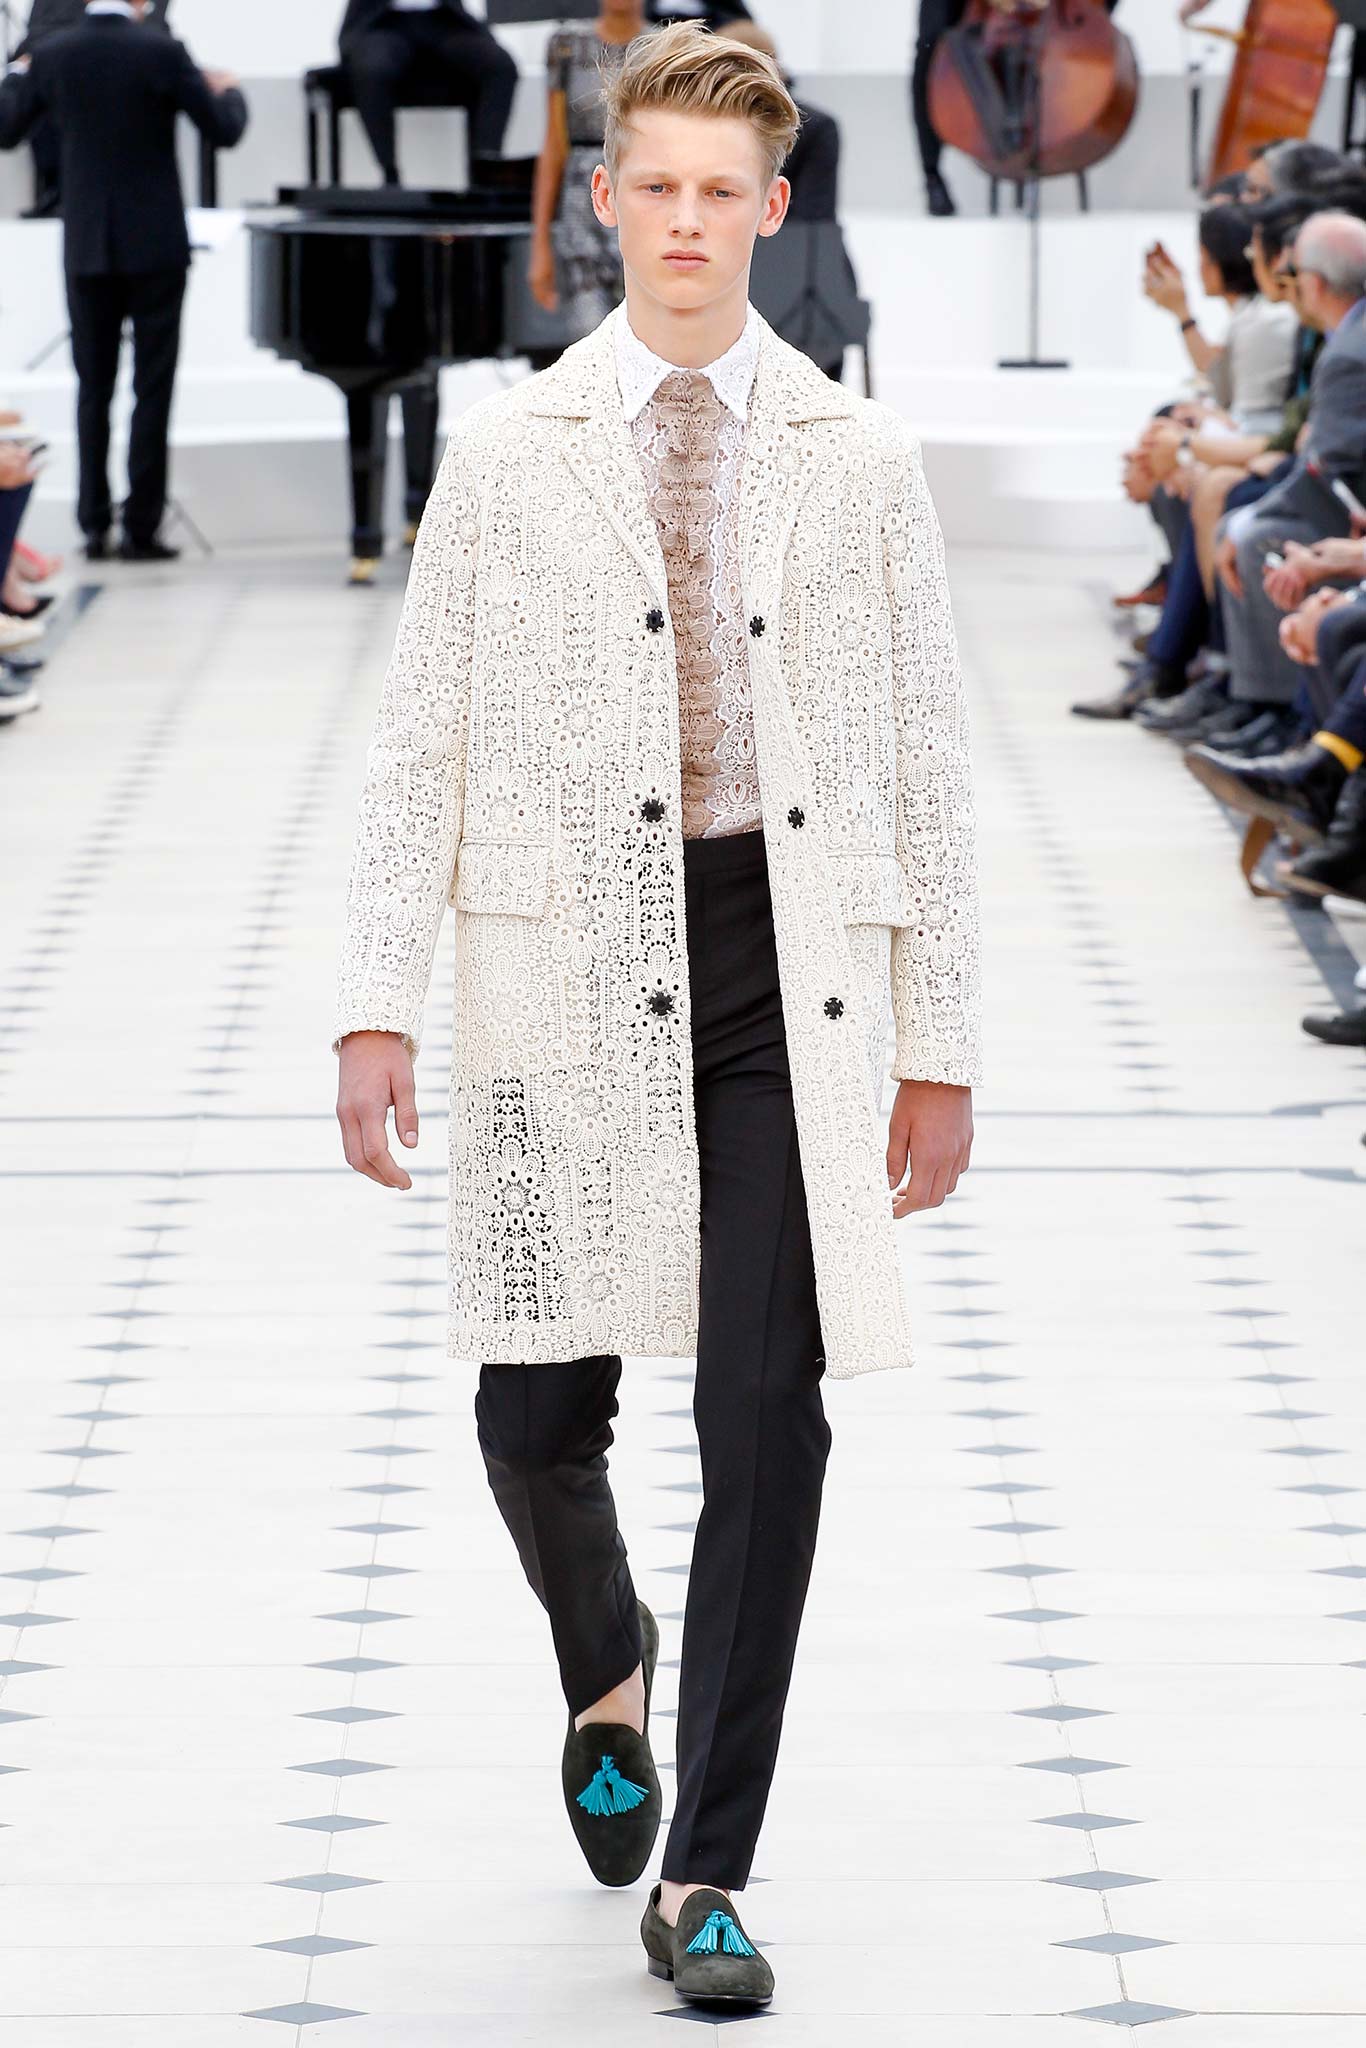 LCM: Burberry Prorsum Spring/Summer 2016 Collection